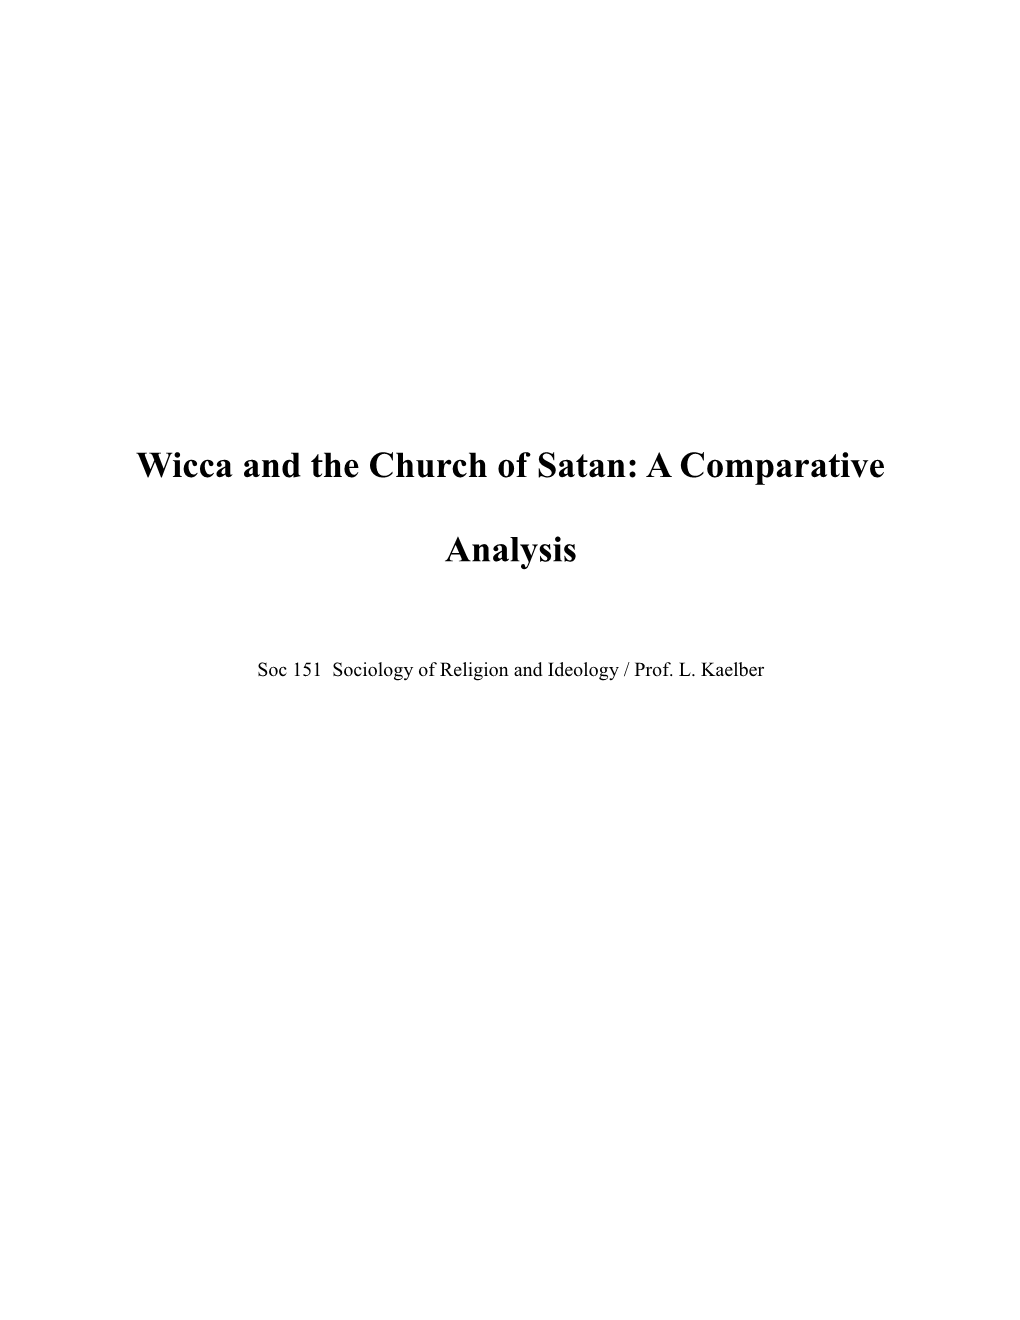 Wicca and the Church of Satan: a Comparative